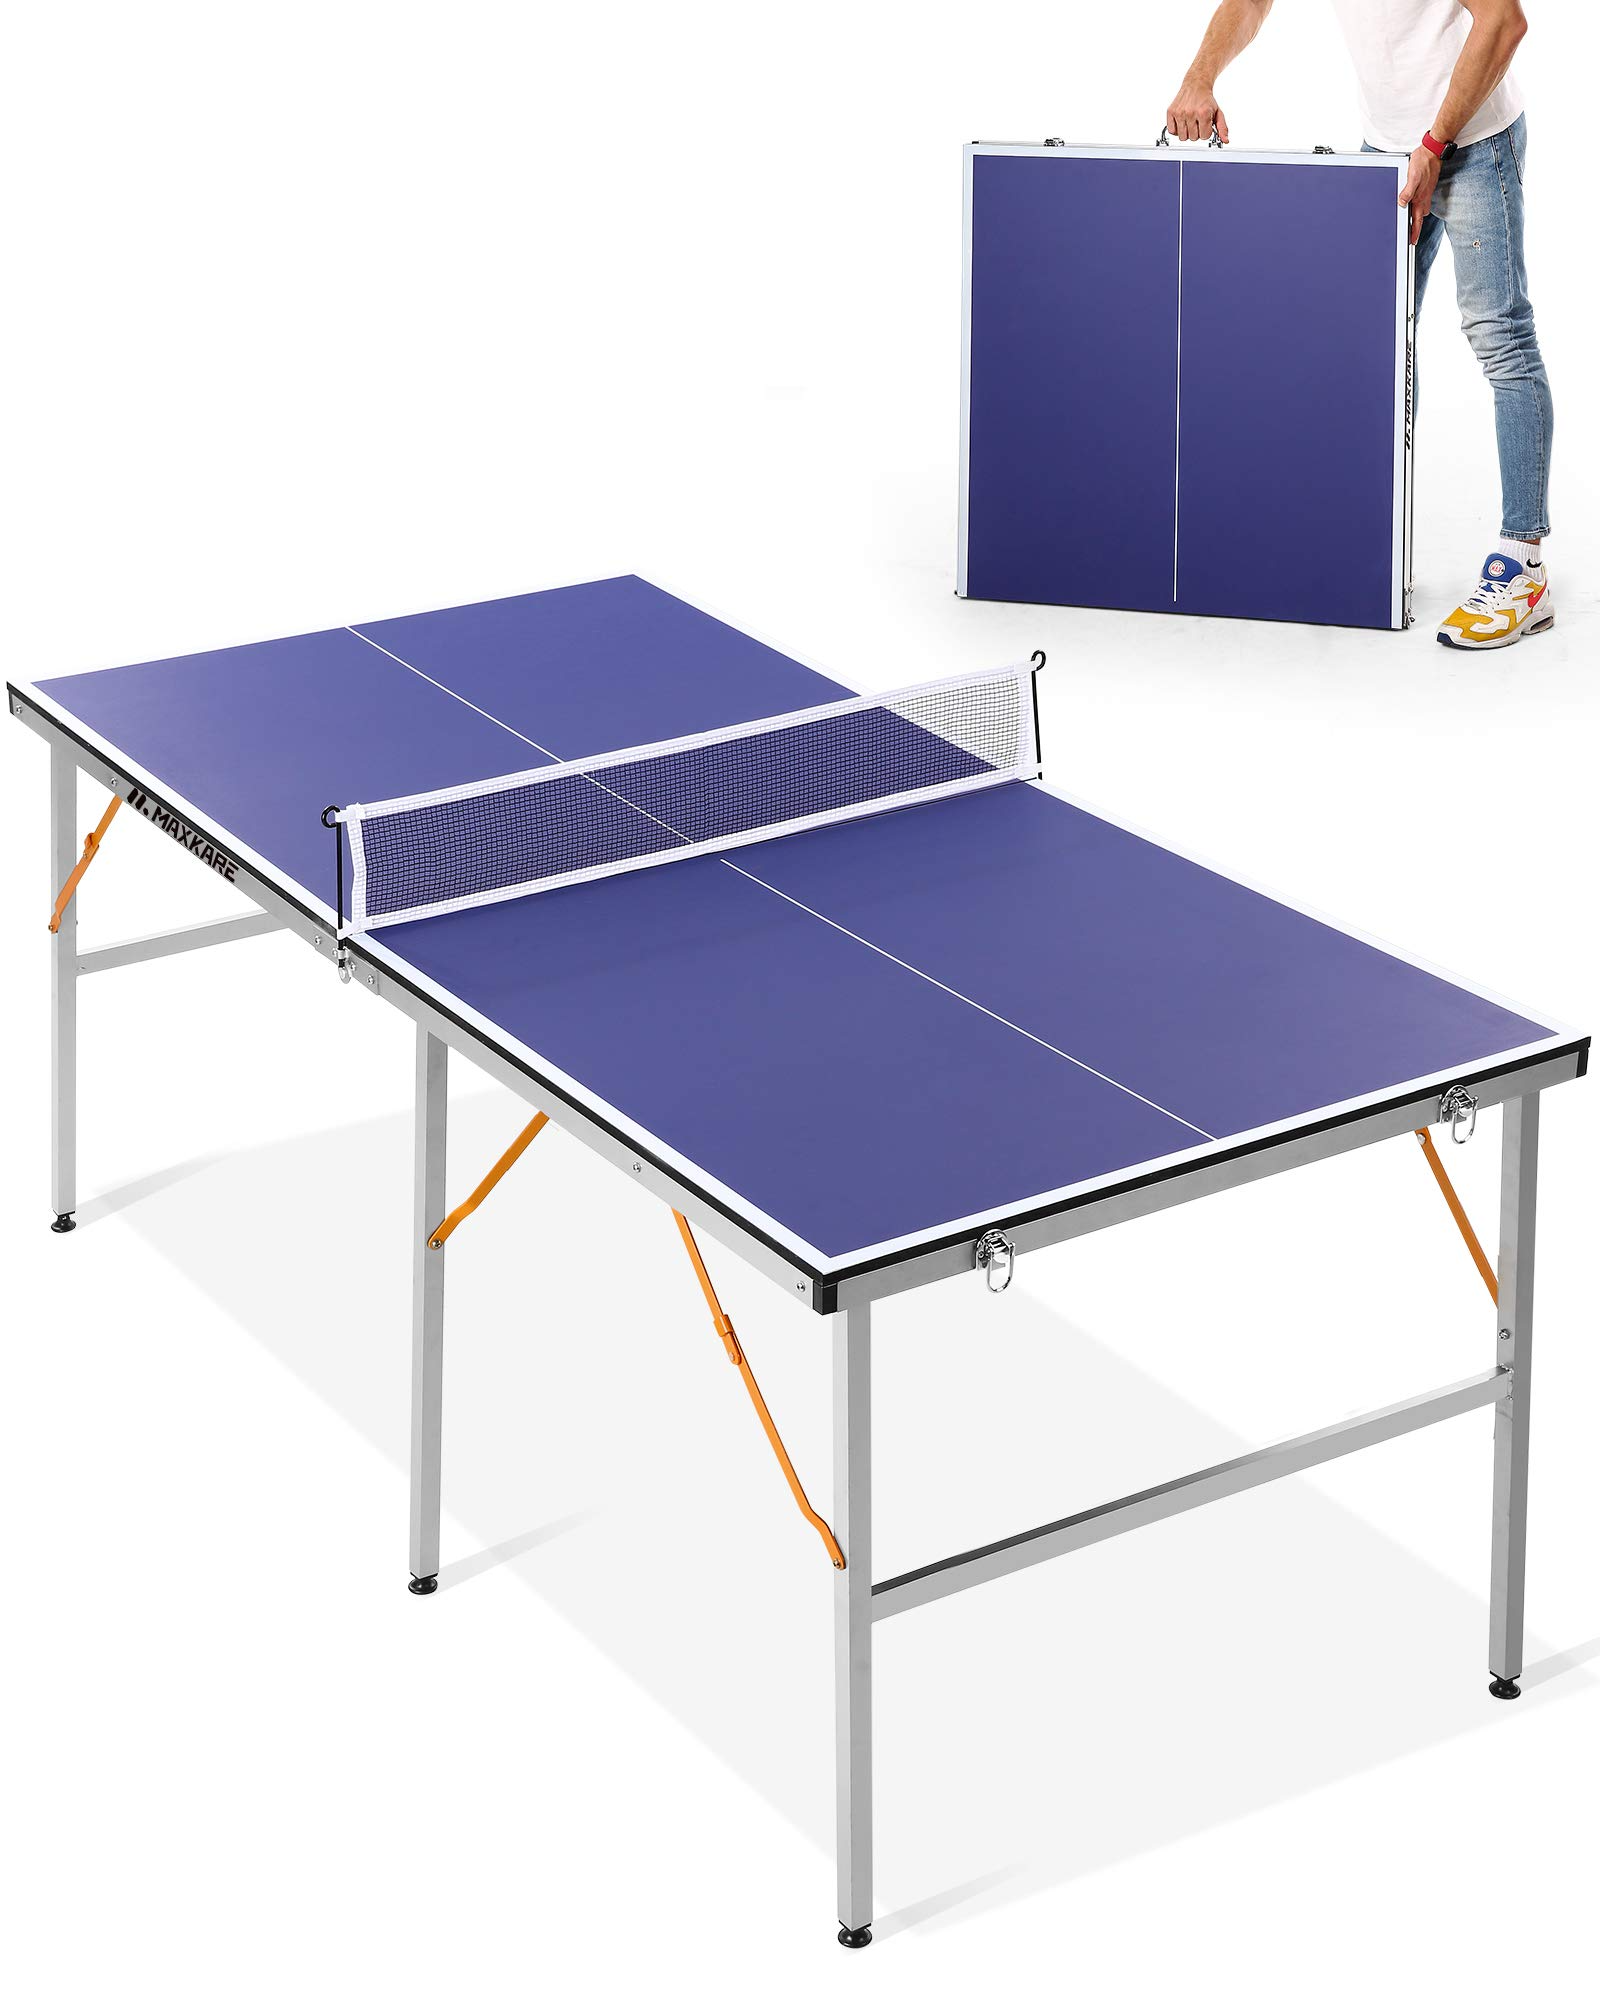 Load image into Gallery viewer, Mid-Size Ping Pong Table, Multi-Use Foldable Table Tennis Table for Indoor Outdoor Family Game, 2 Table Tennis Paddles and 3 Balls
